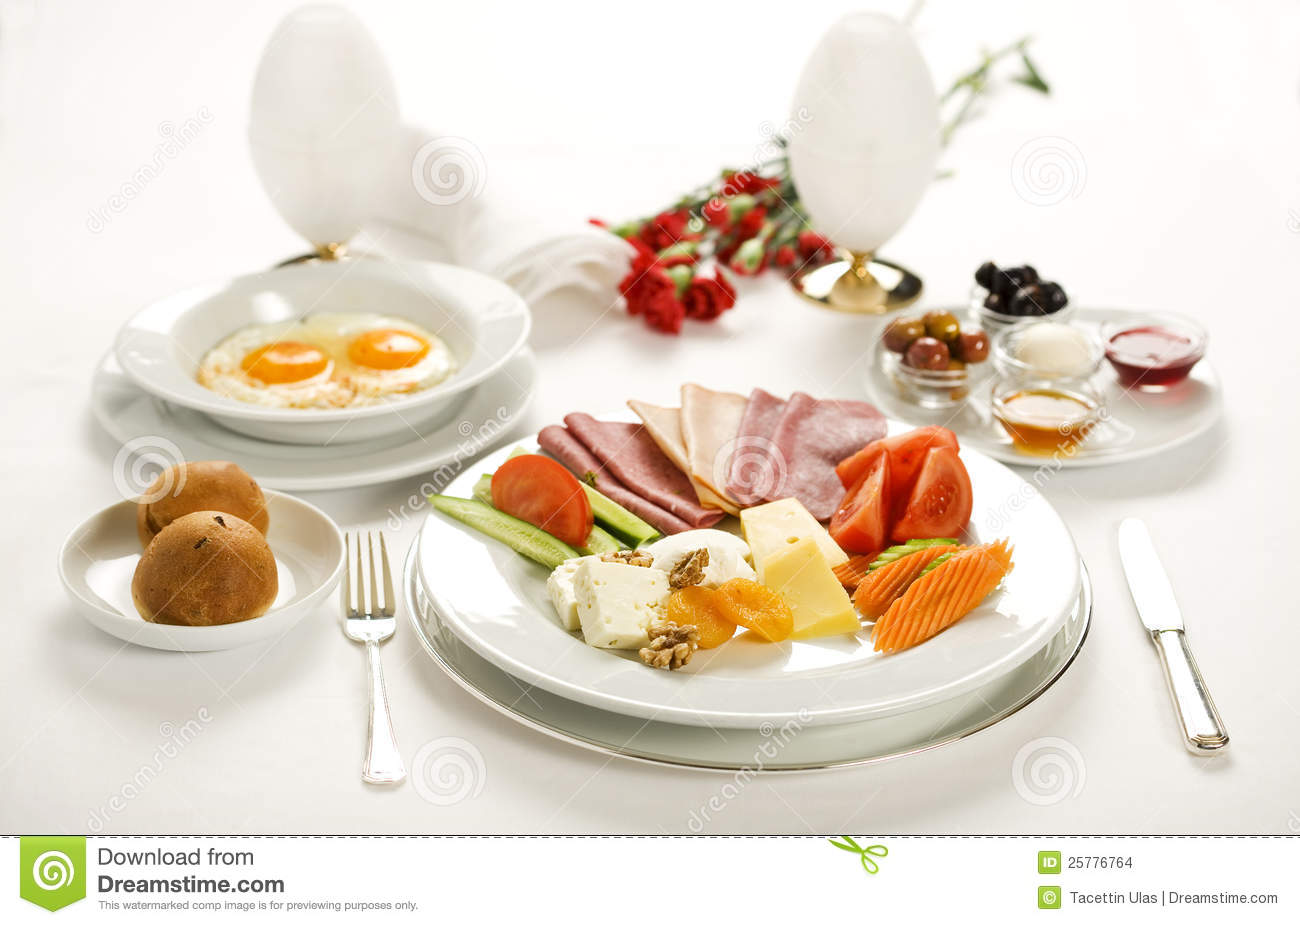 Breakfast Plate Stock Images   Image  25776764